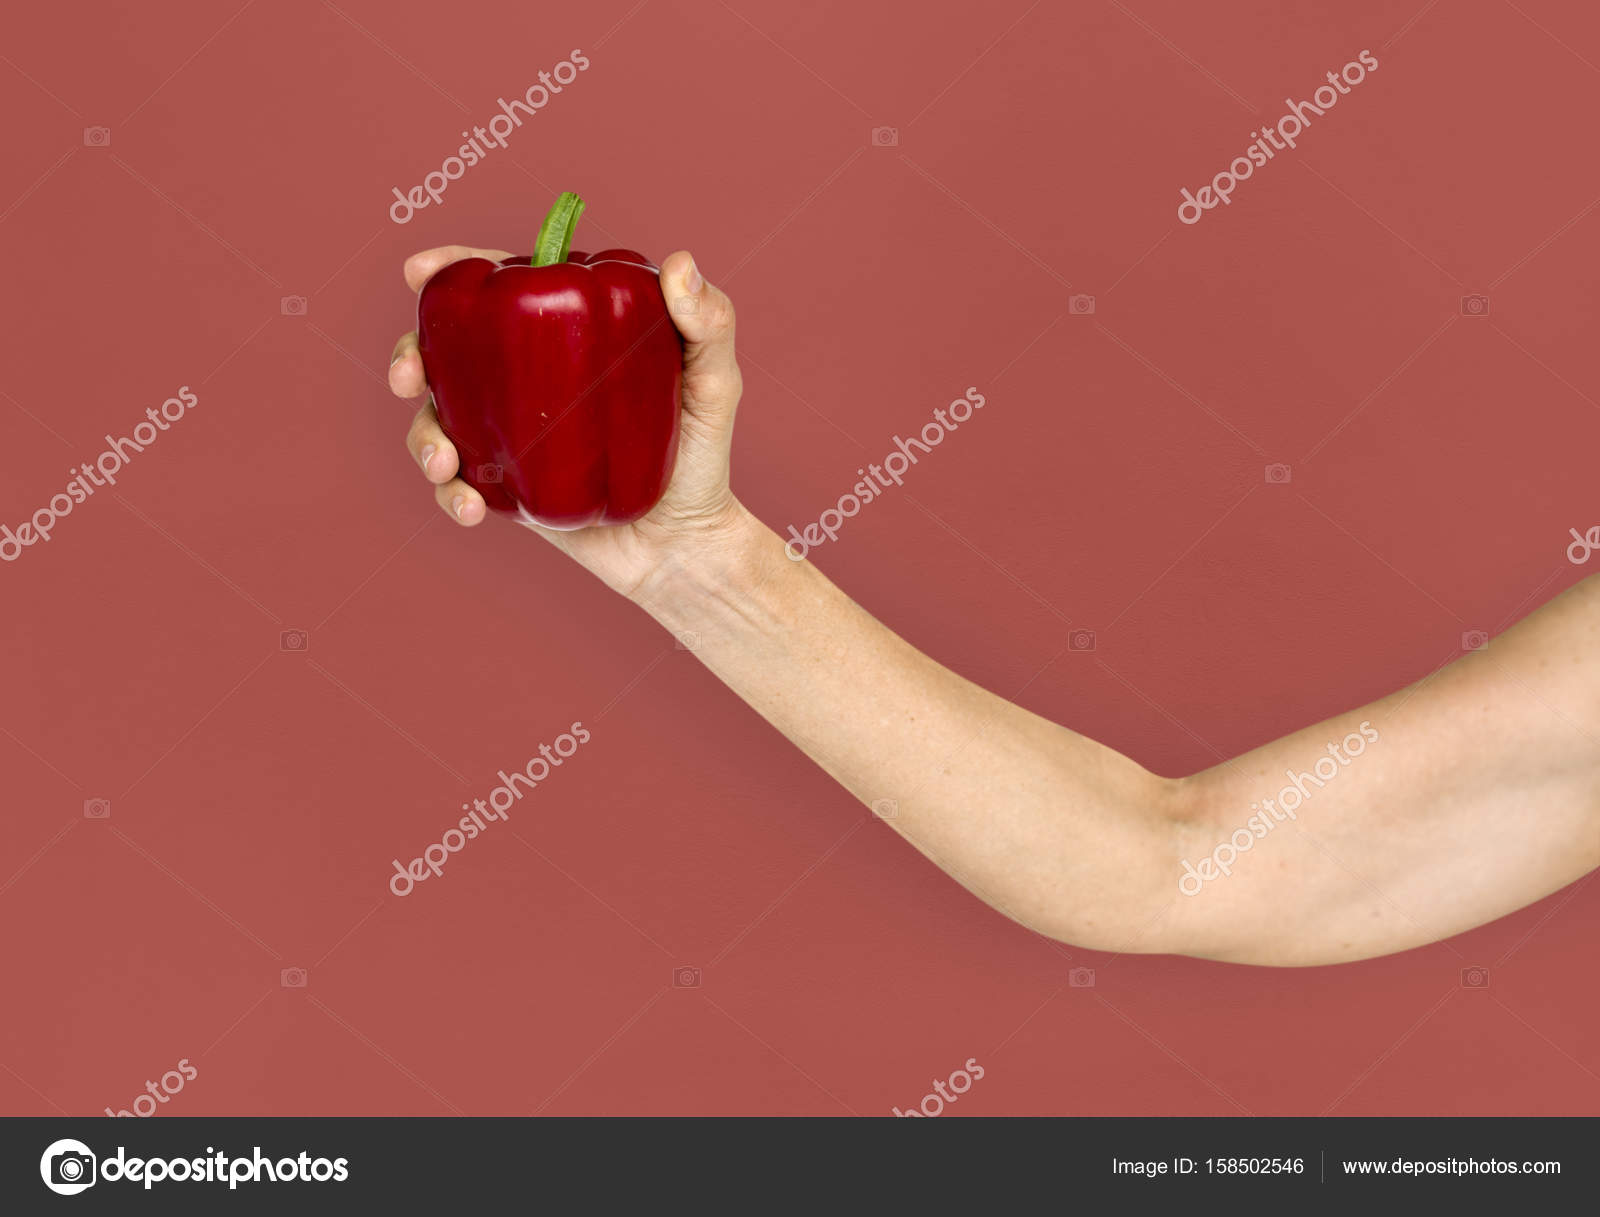 hand holding bell pepper — Stock Photo © Rawpixel #158502546